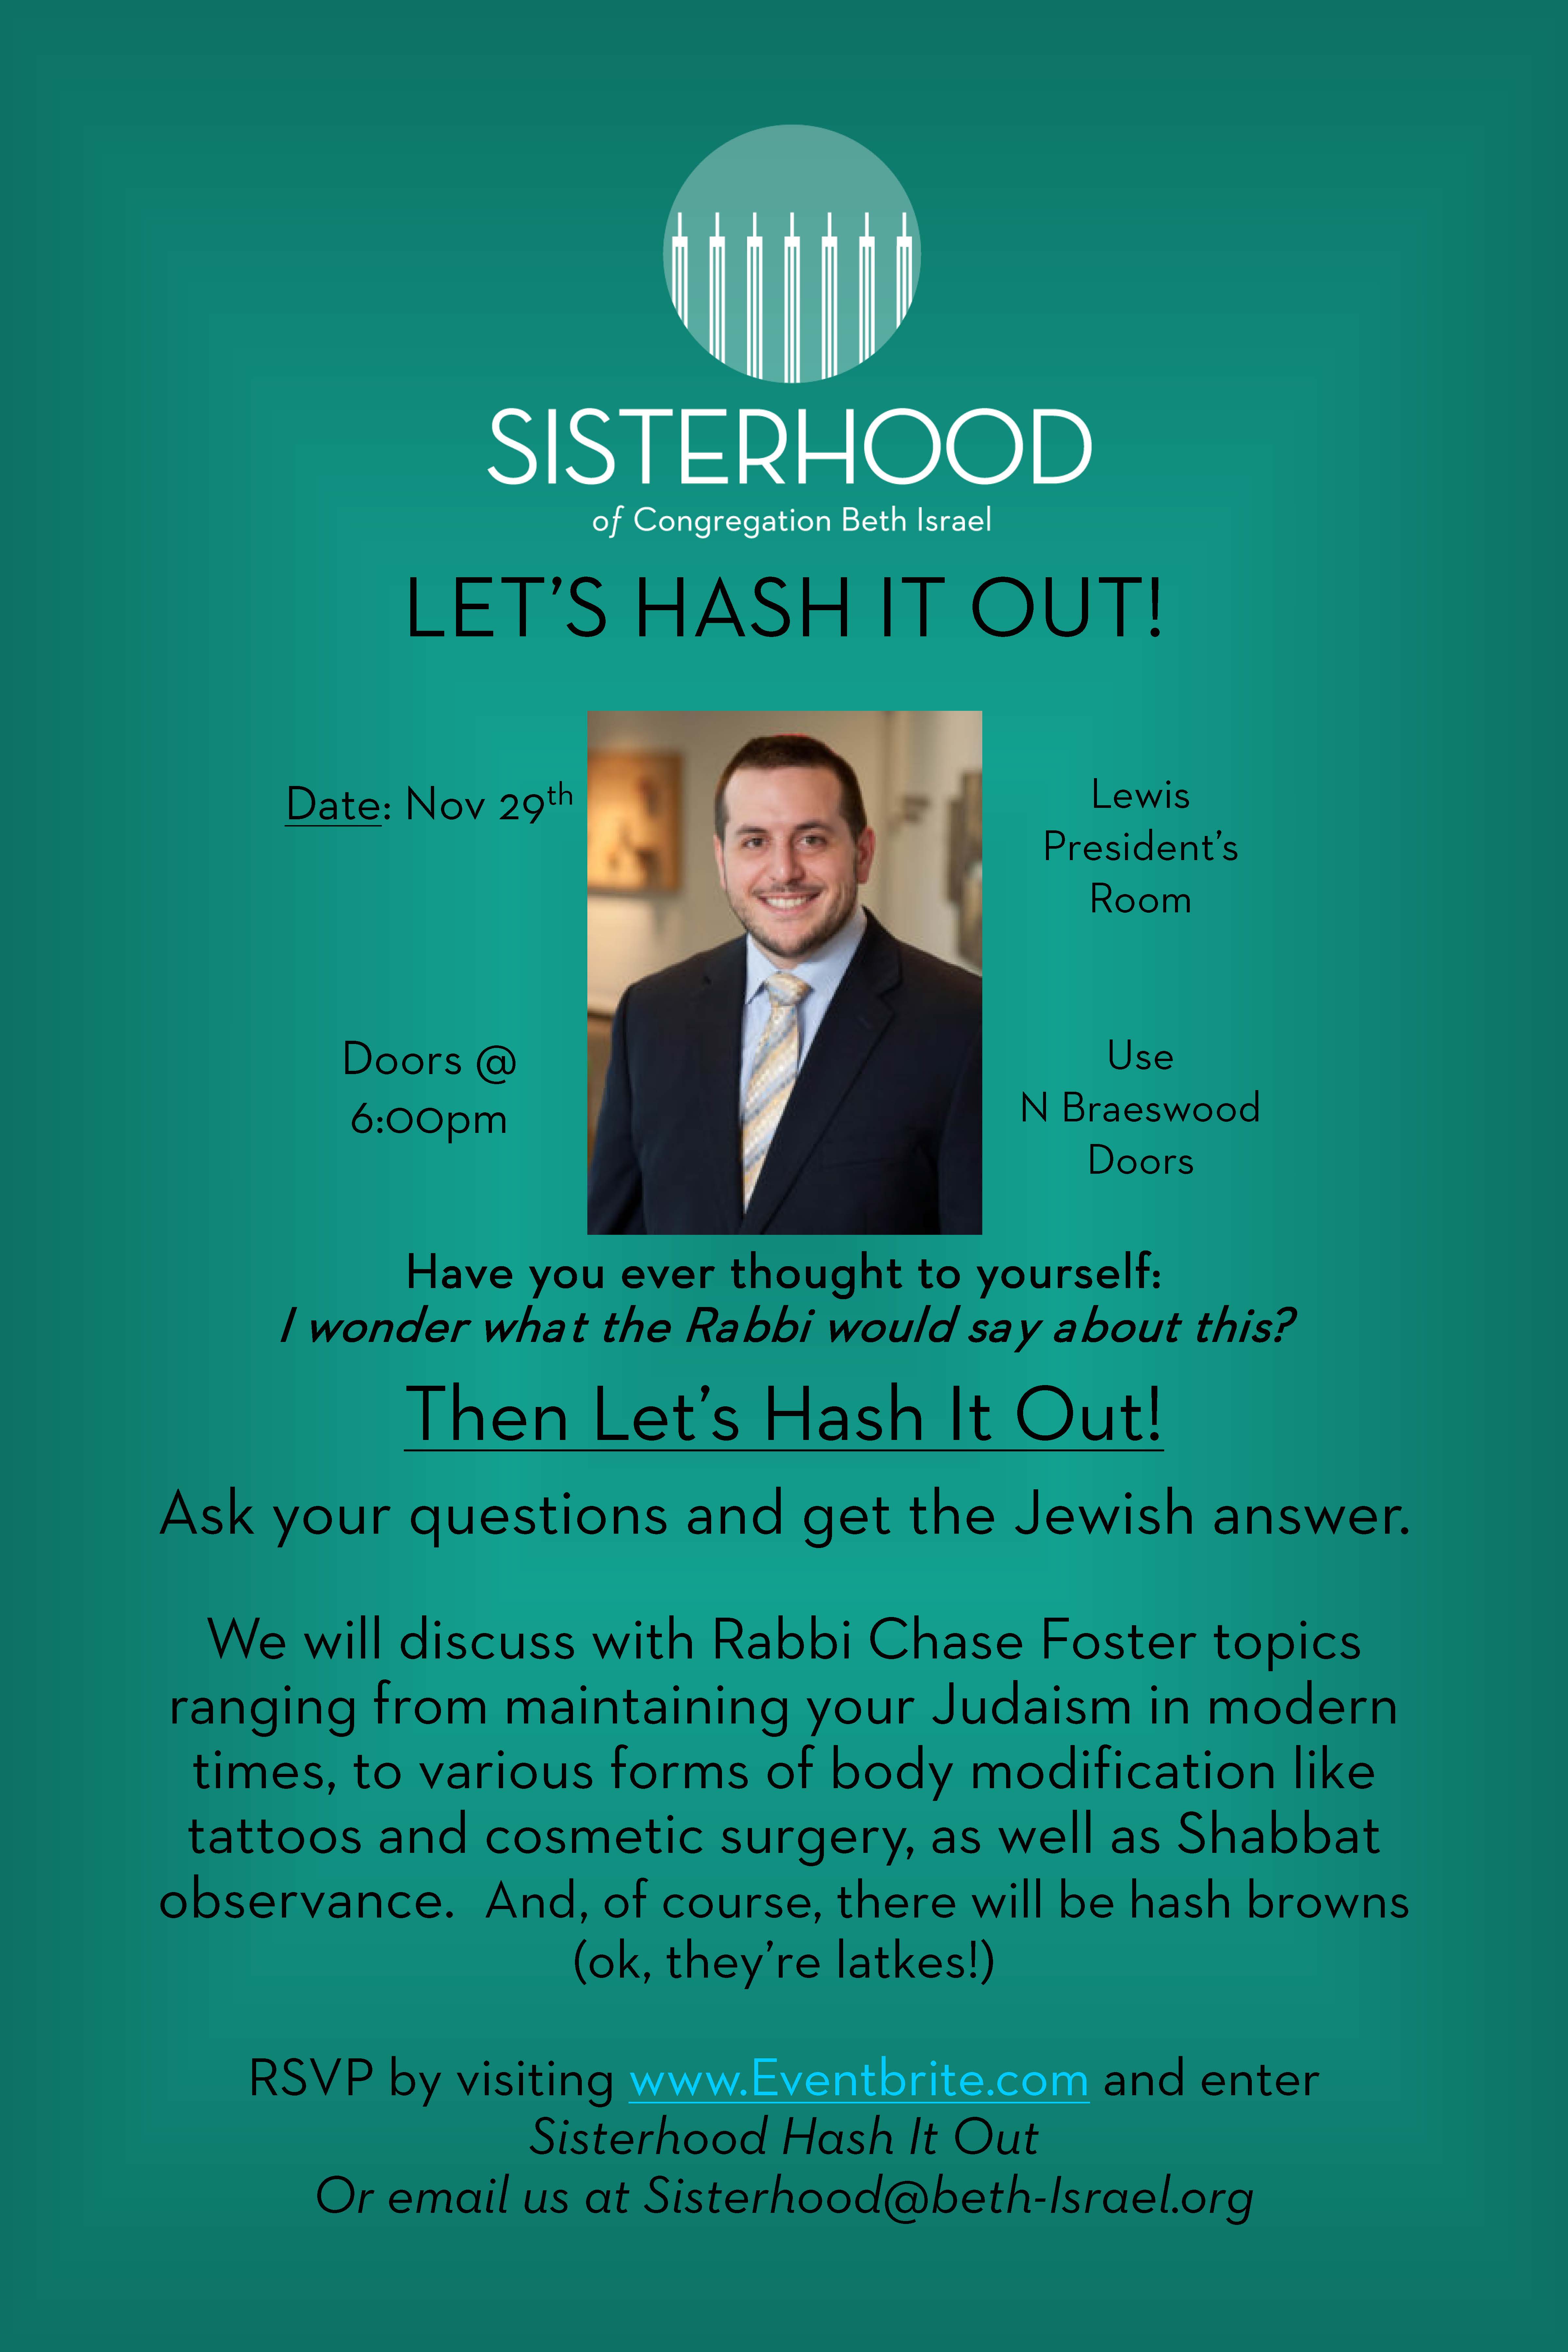 Sisterhood's Hash It Out with Rabbi Foster 3